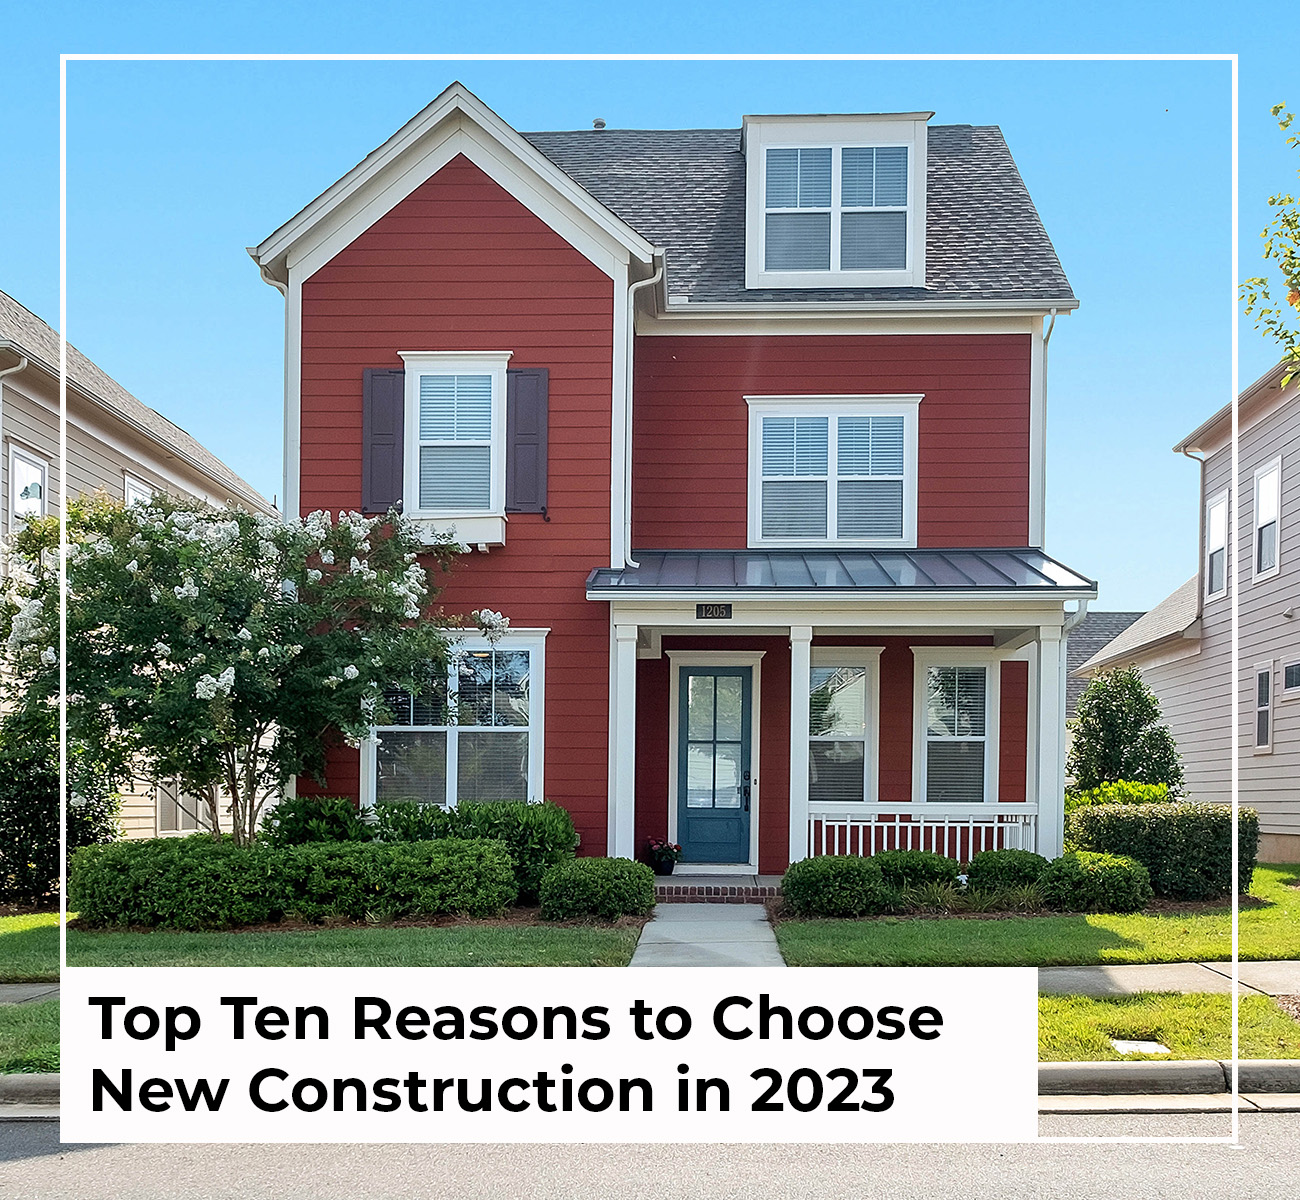 Top Ten Reasons to Choose New Construction in 2023